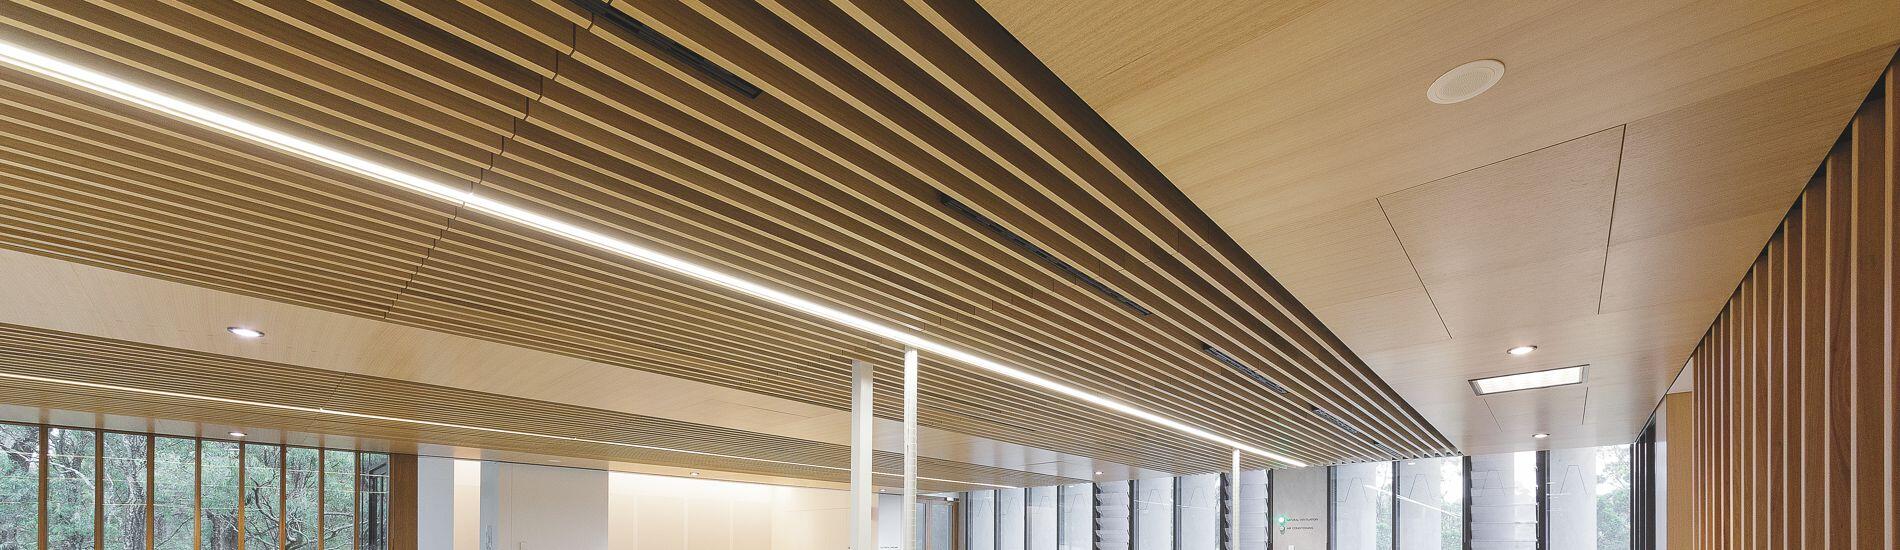 SUPASLAT Slatted and SUPACOUSTIC Acoustic Timber Panels Meet BCA Requirements